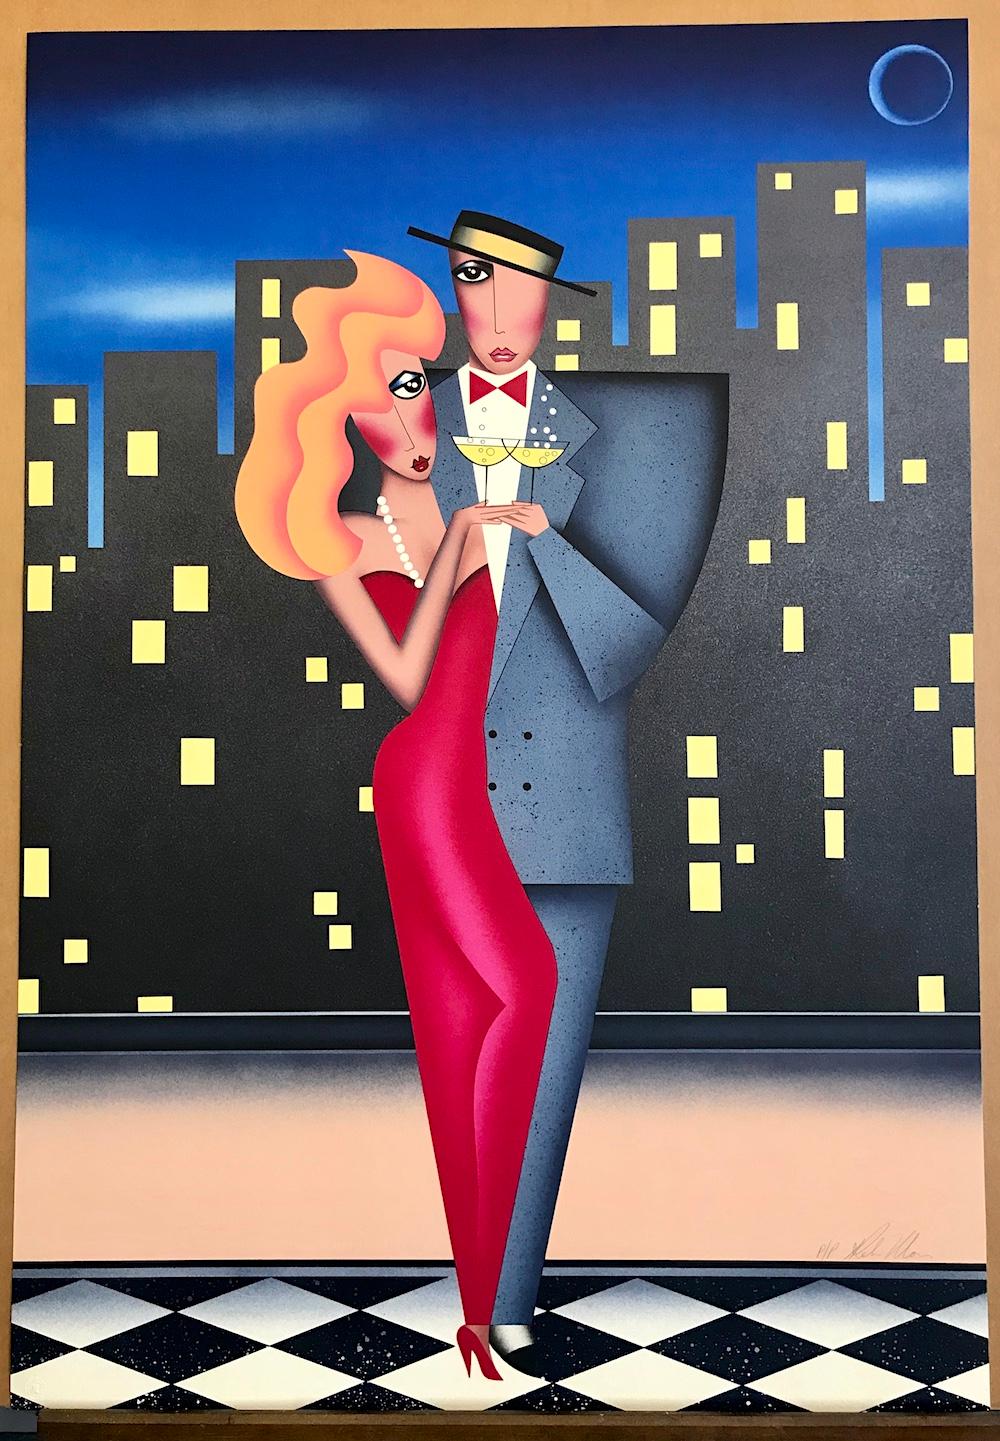 CITY LIGHTS Signed Lithograph, City Couple Portrait, Checkered Floor, Champagne - Art Deco Print by Robin Morris